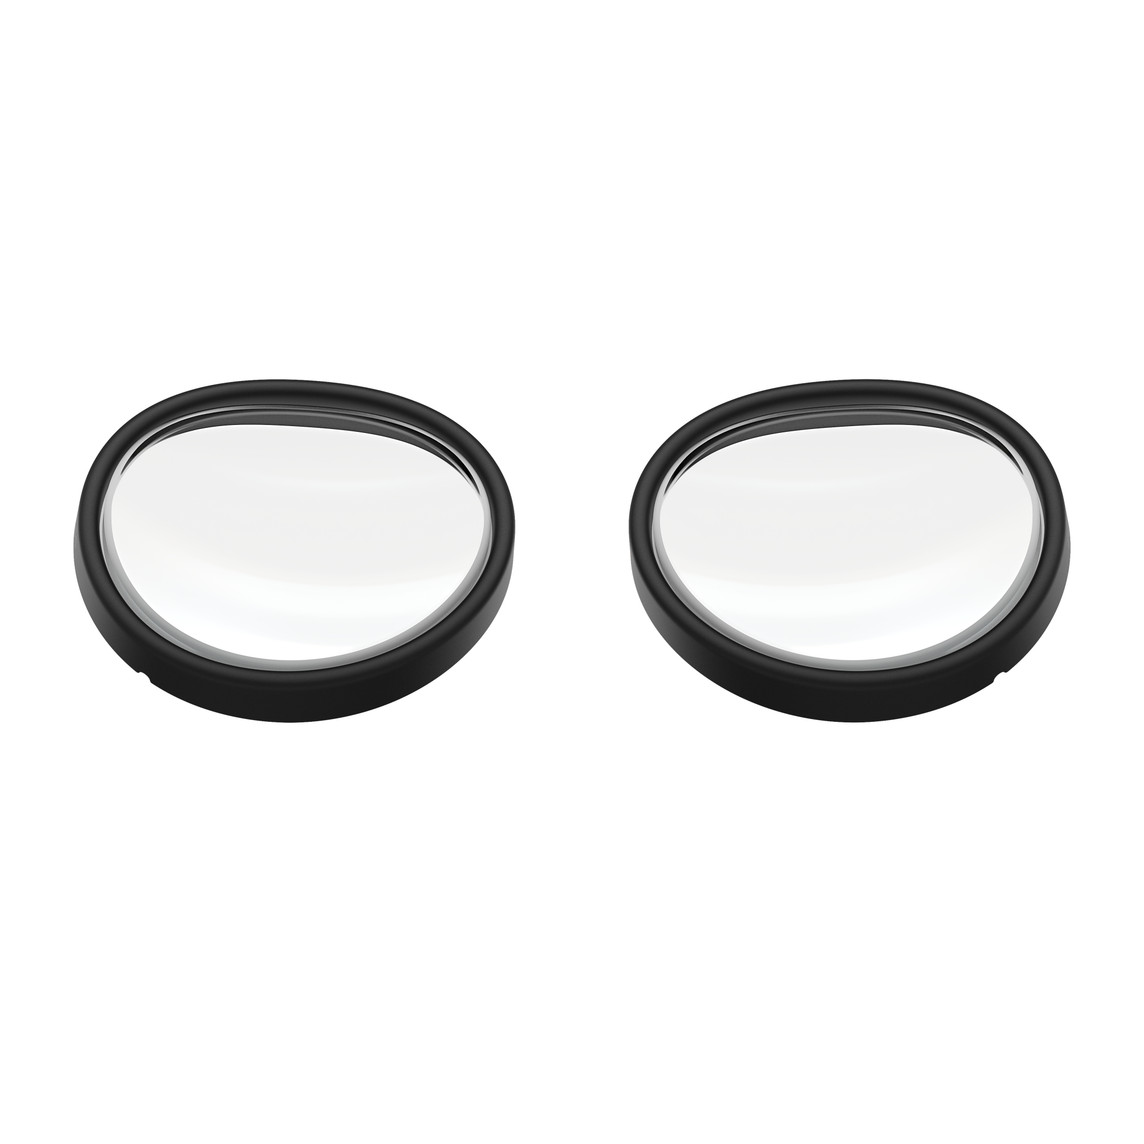 A pair of ZEISS Optical Inserts, round lenses, black frames